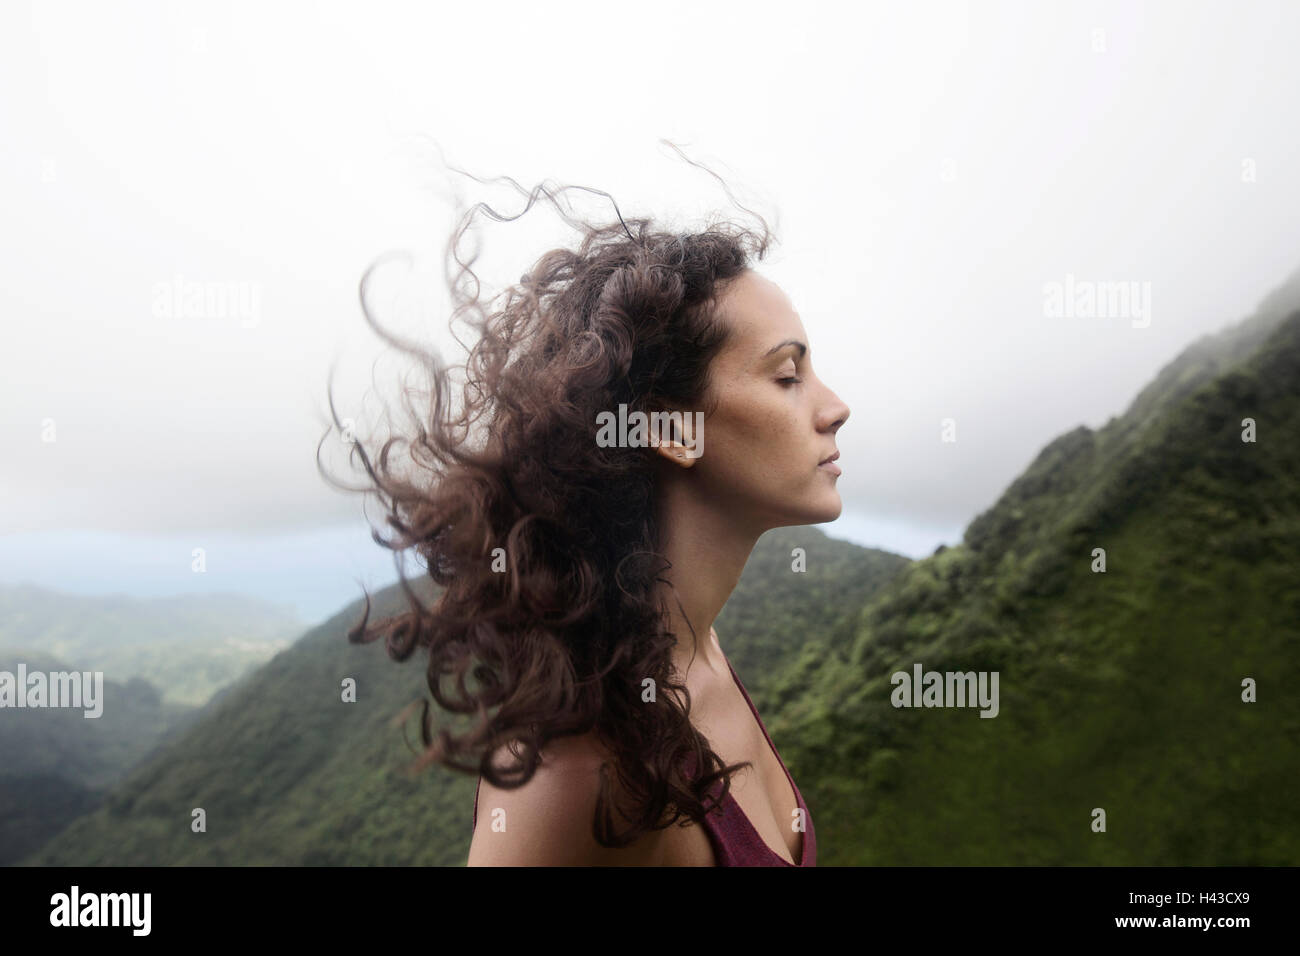 Wind blowing hair of Mixed Race woman Stock Photo